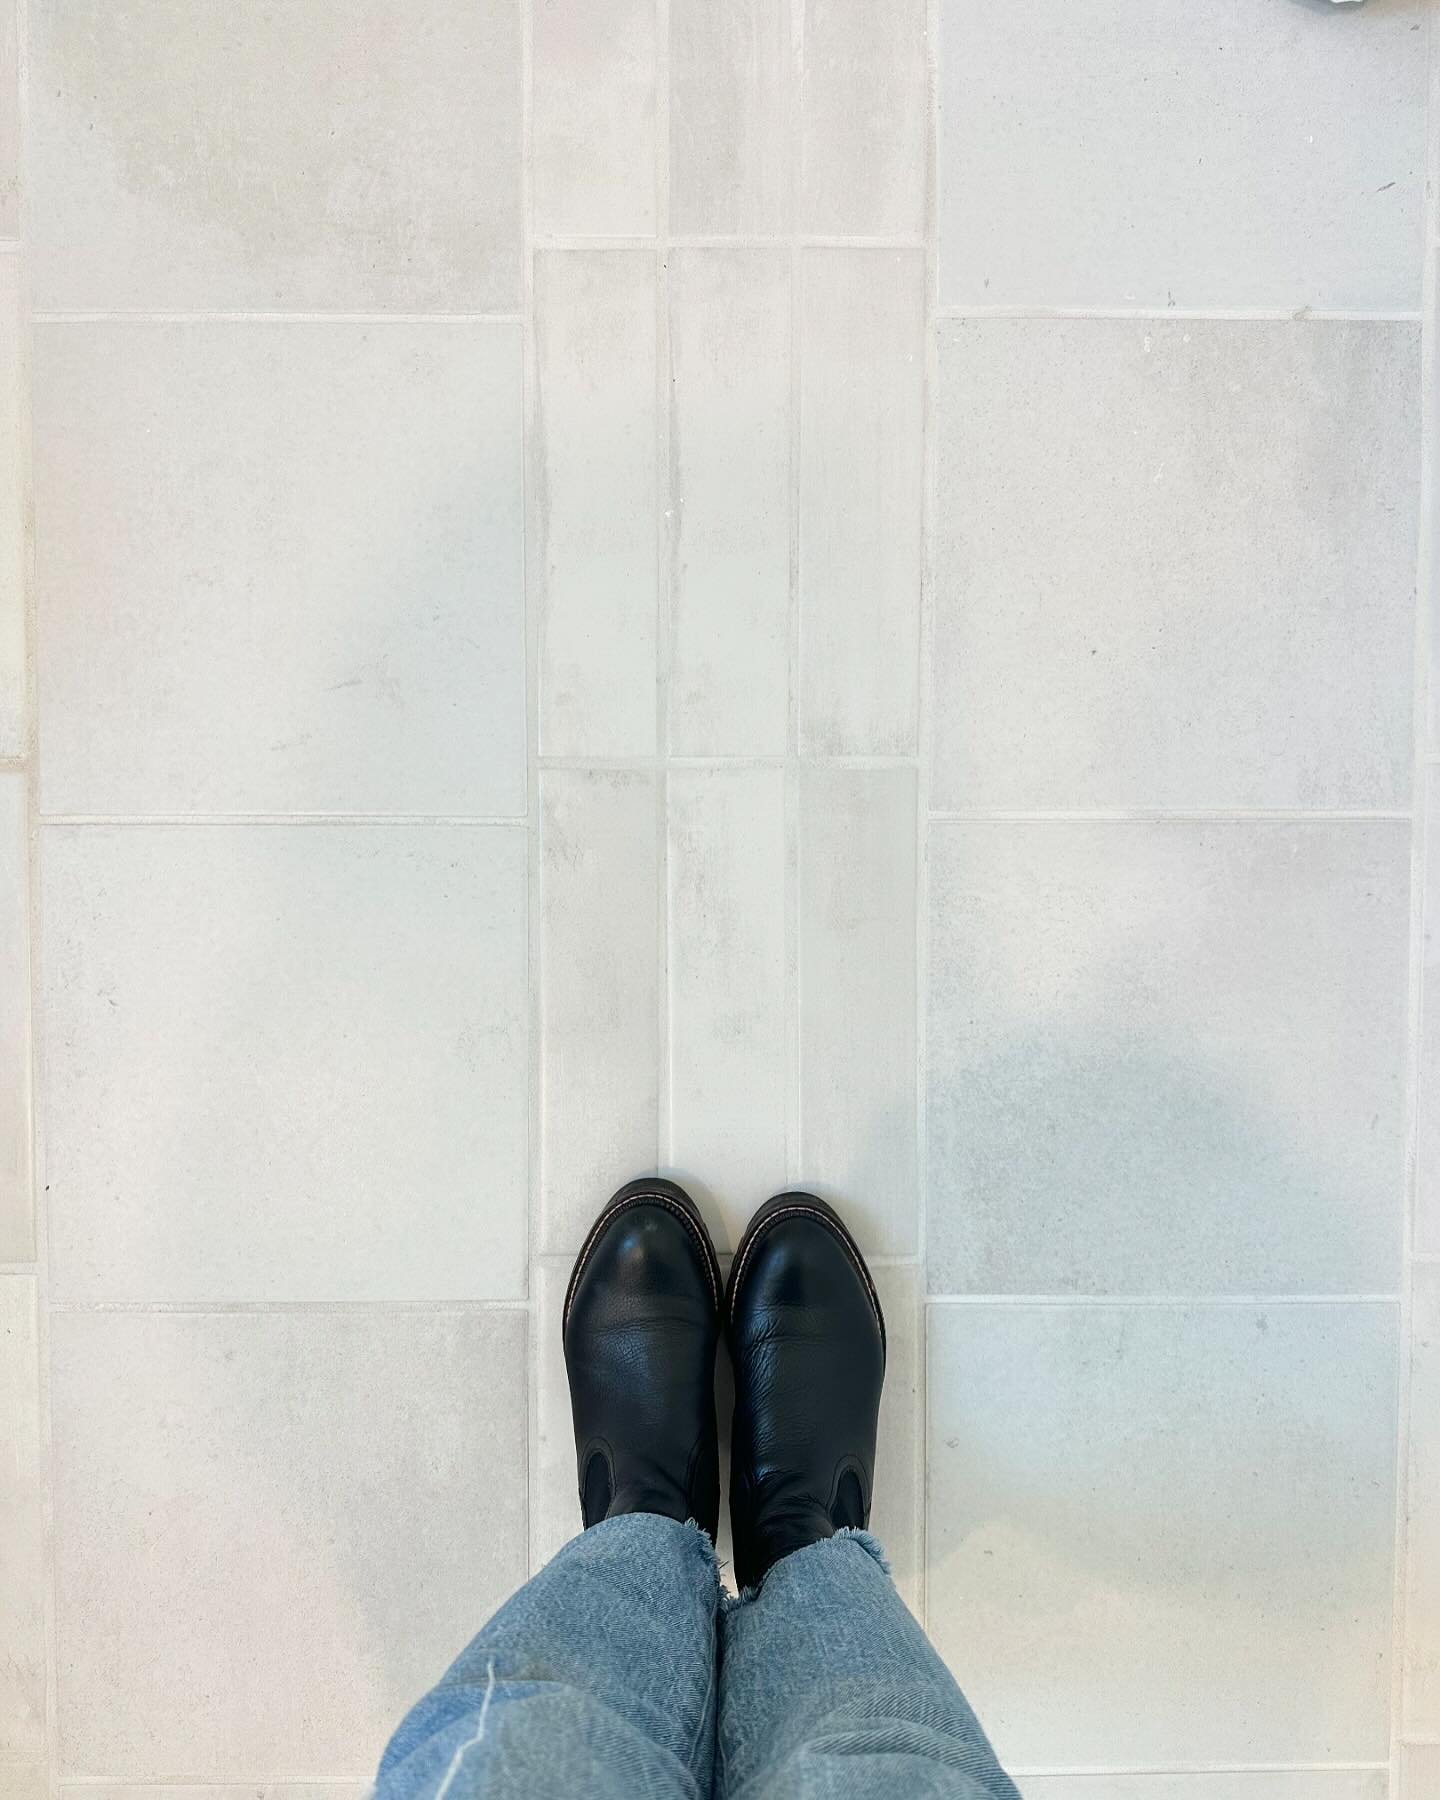 For this #tilethursday , what do you think of this mix of tile shapes/sizes? 

I think it&rsquo;s a great way to use basic tile and make it more interesting. Mixing tile shapes in the same color is a great affordable way to add more visual interest.
